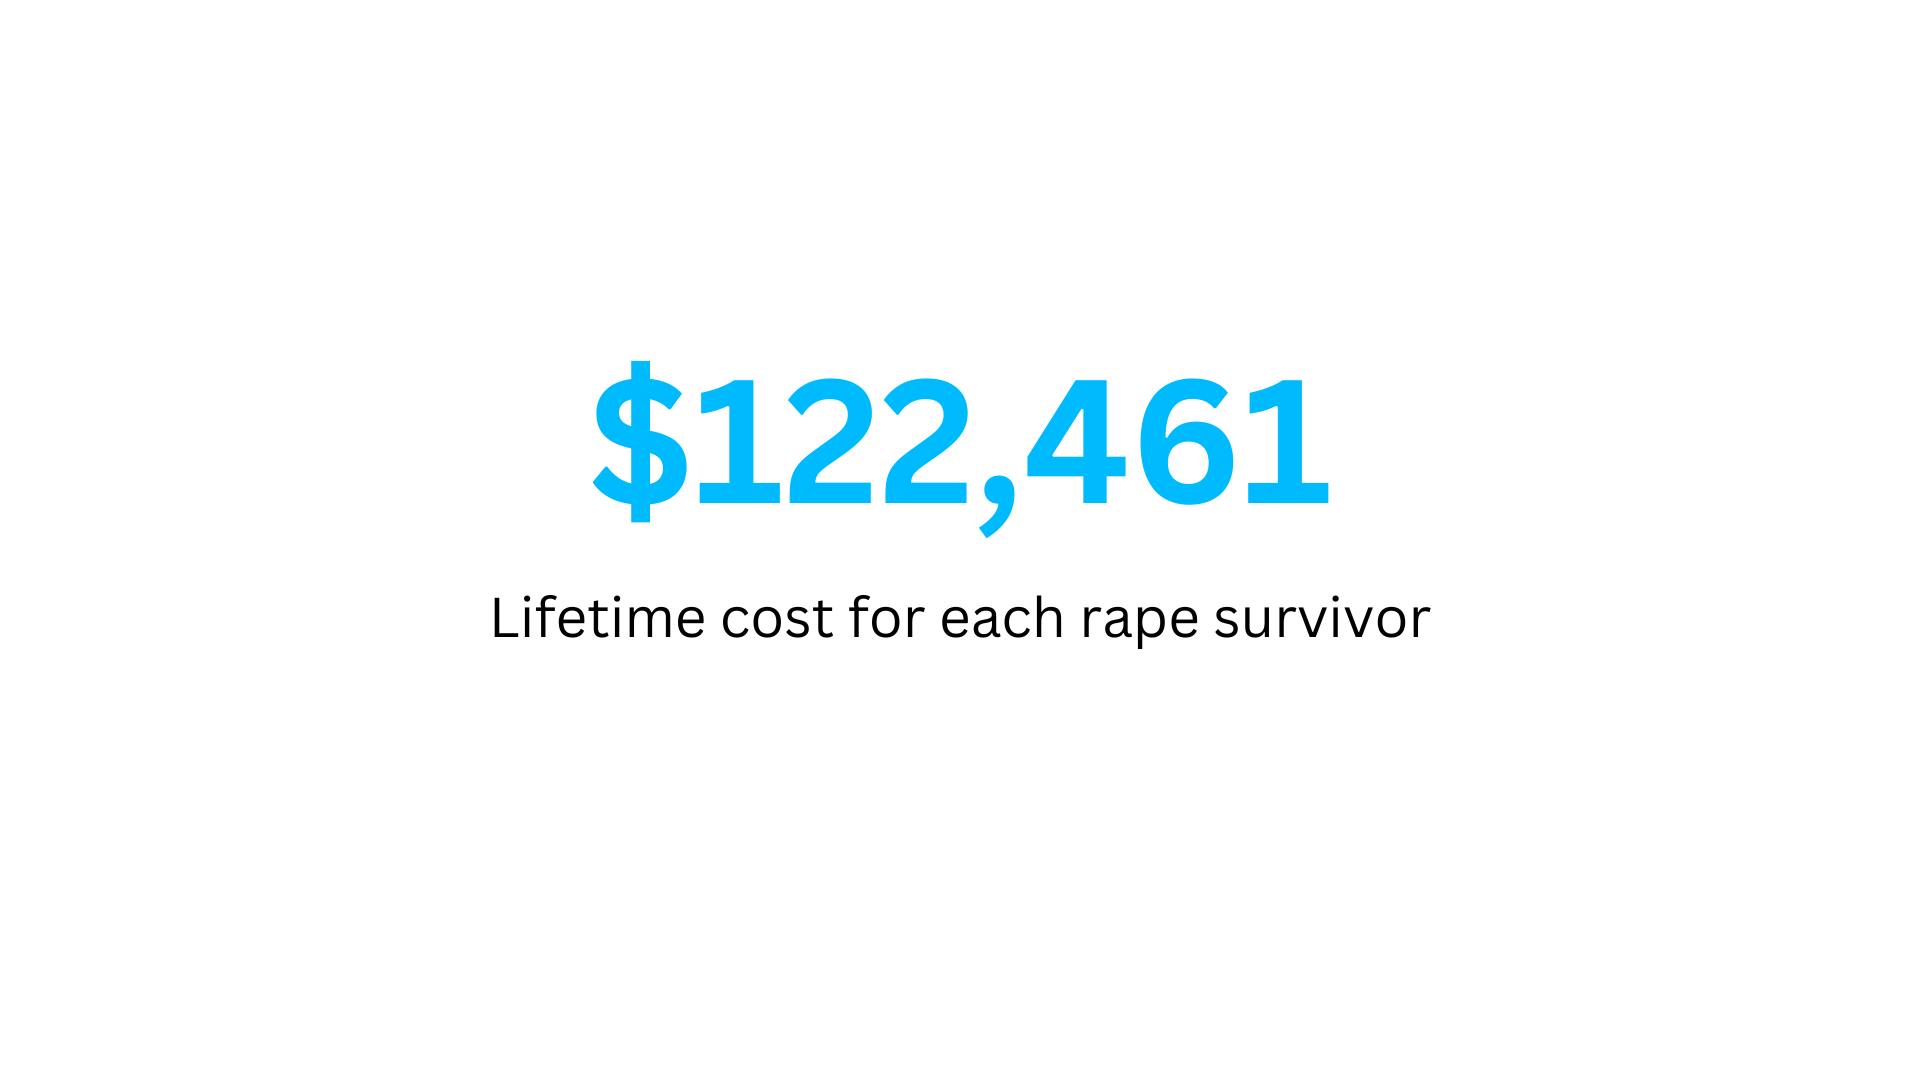 Sexual harassment statistics - The financial burden experienced by rape victims